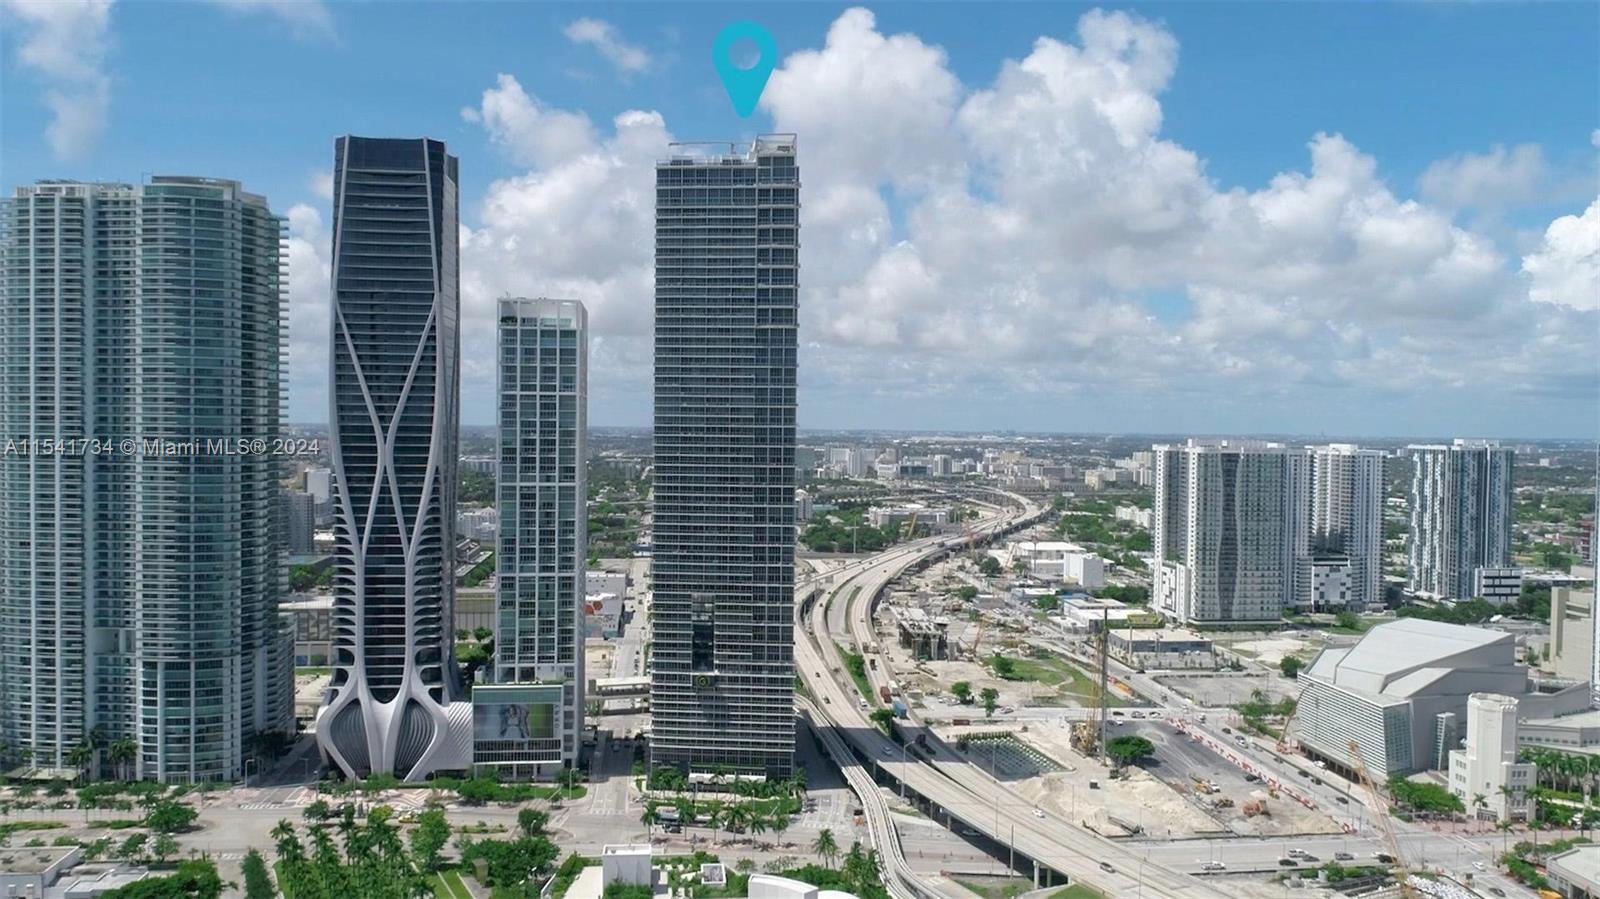 Enjoy the breathtaking view in this gorgeous apartment facing to Biscayne Bay day and night. The most desired line in the building. Walking distance to Brickell and only few minutes away from Midtown, Wynwood, Edgewater and Design District area. Across from Kaseya Center, Frost Science Museum and Port Miami. Watch the cruises departing from the port. Unfurnished unit! Contact listing agent for showings. 24 hours required.